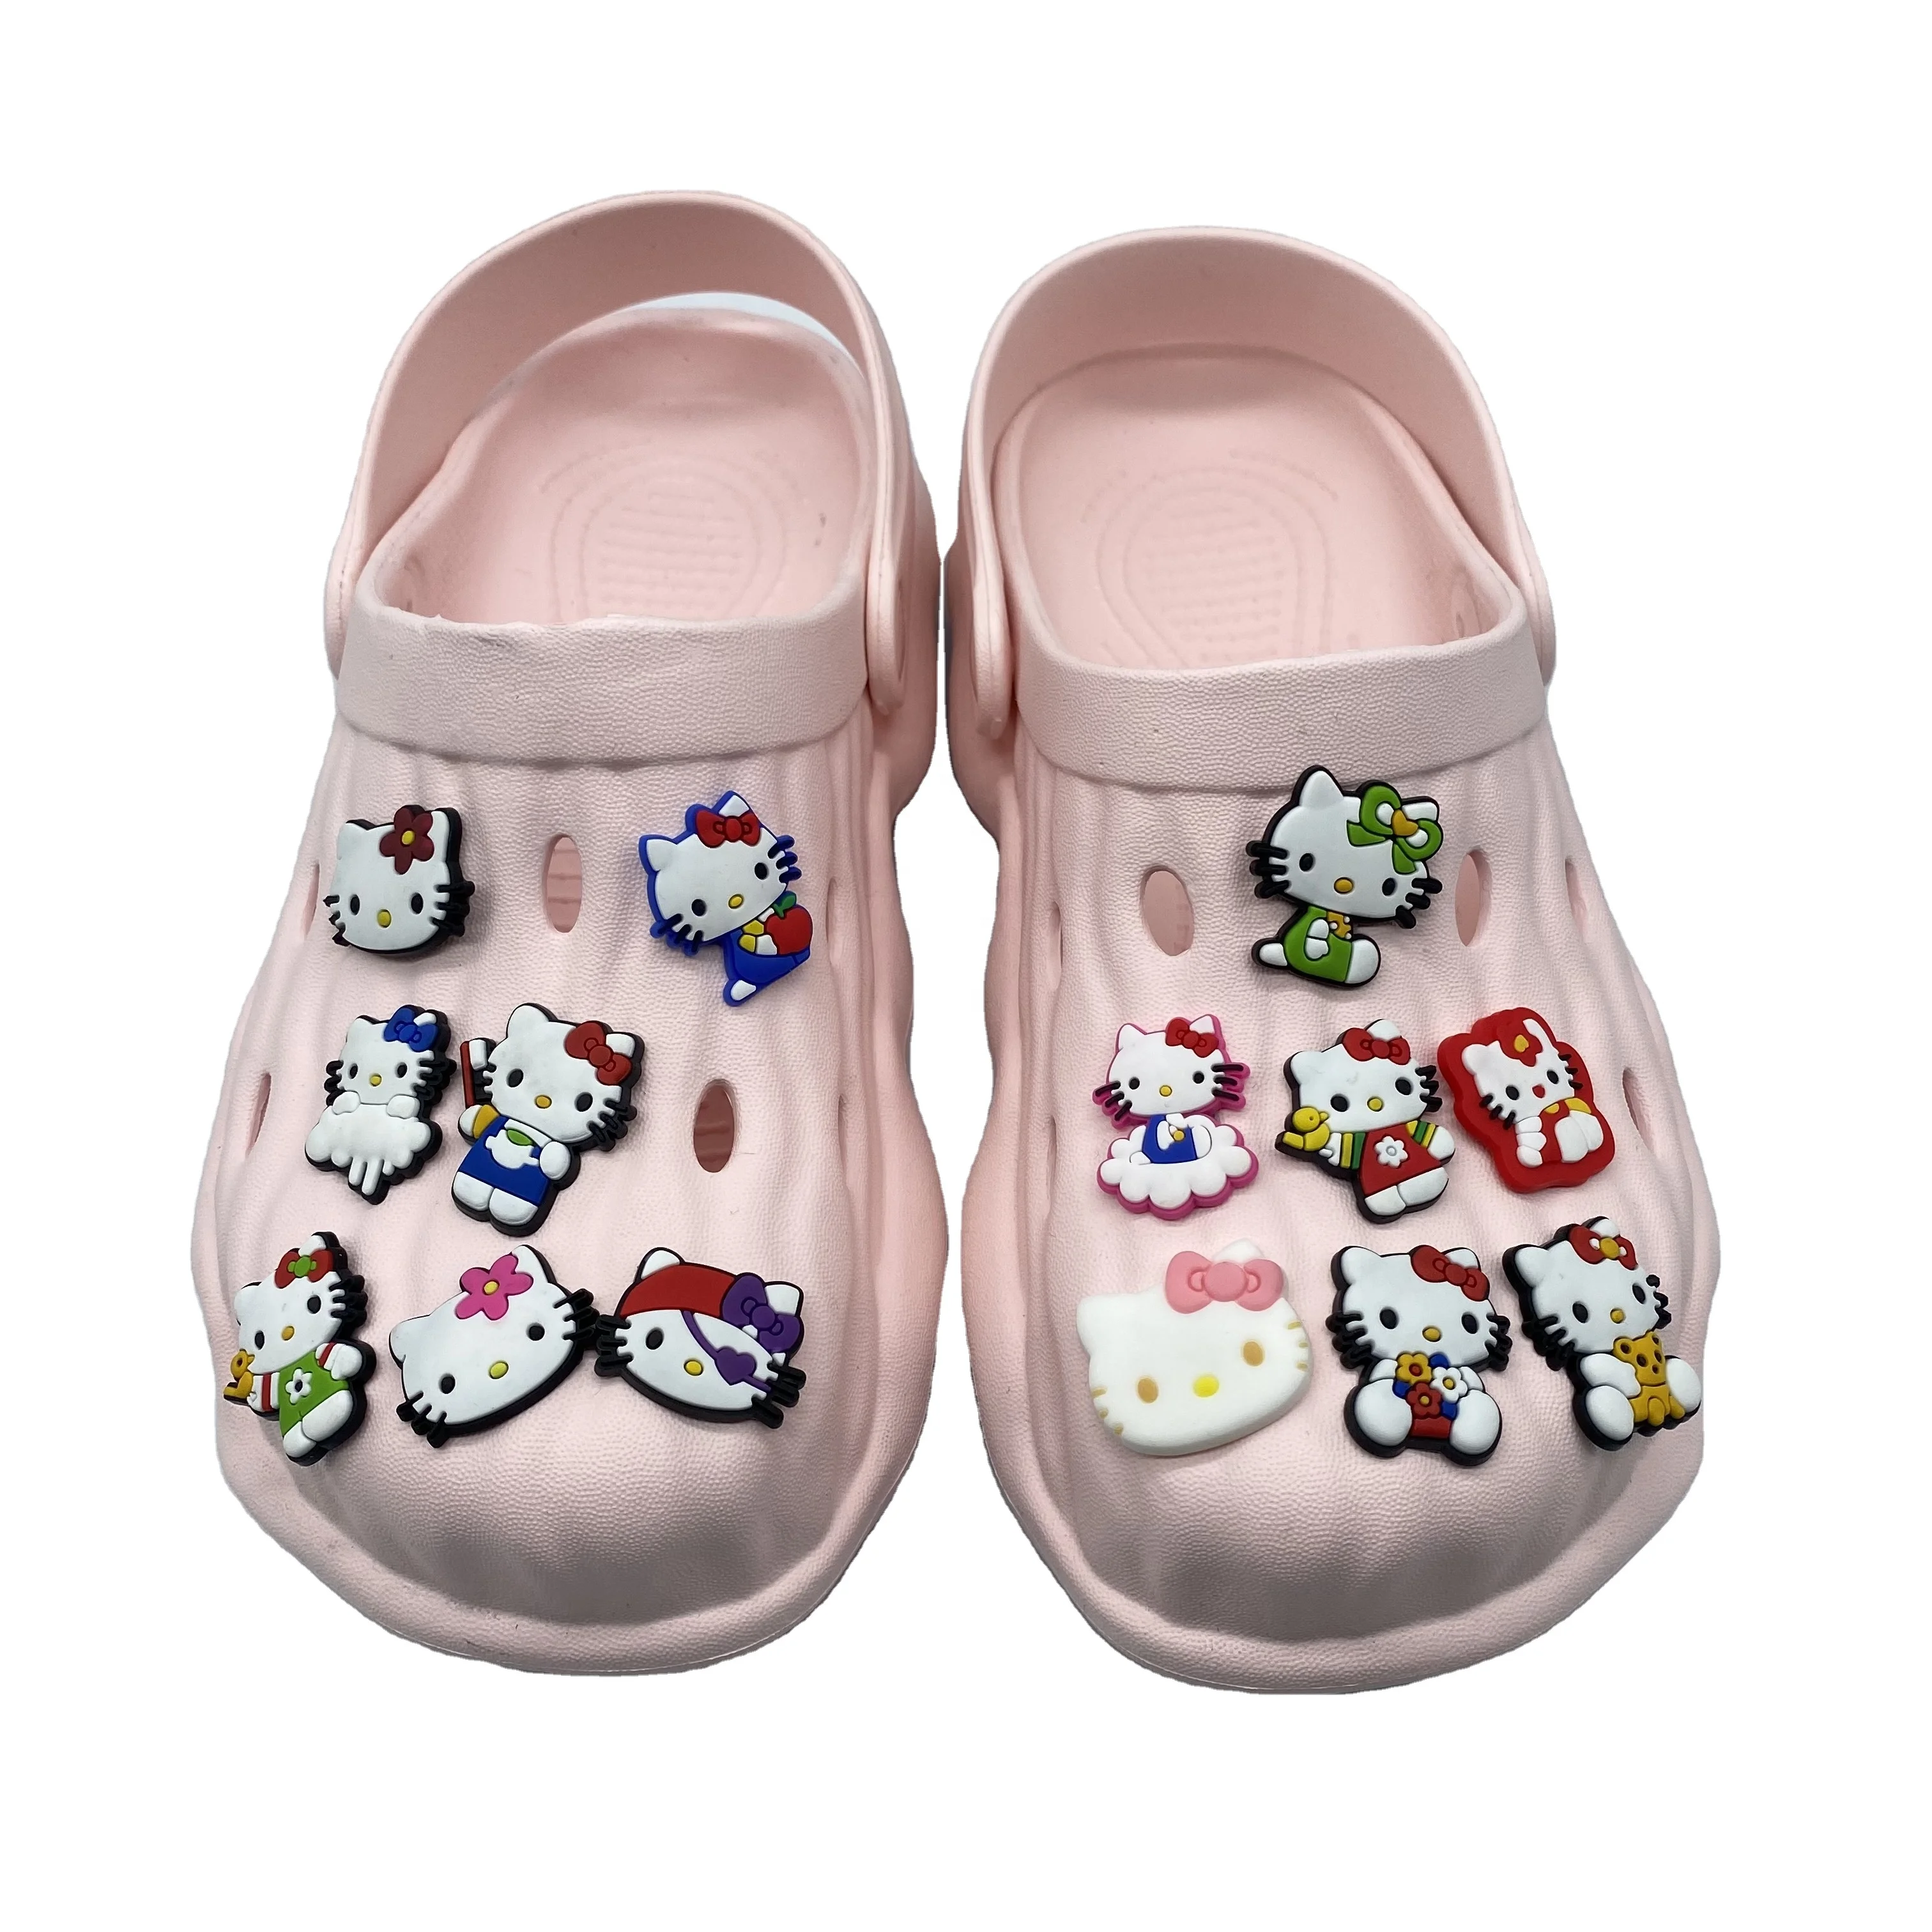 

Hello kitty soft pvc rubber shoe lace charms custom clog pvc shoes charms decoration for wholesale kids girl, As picture